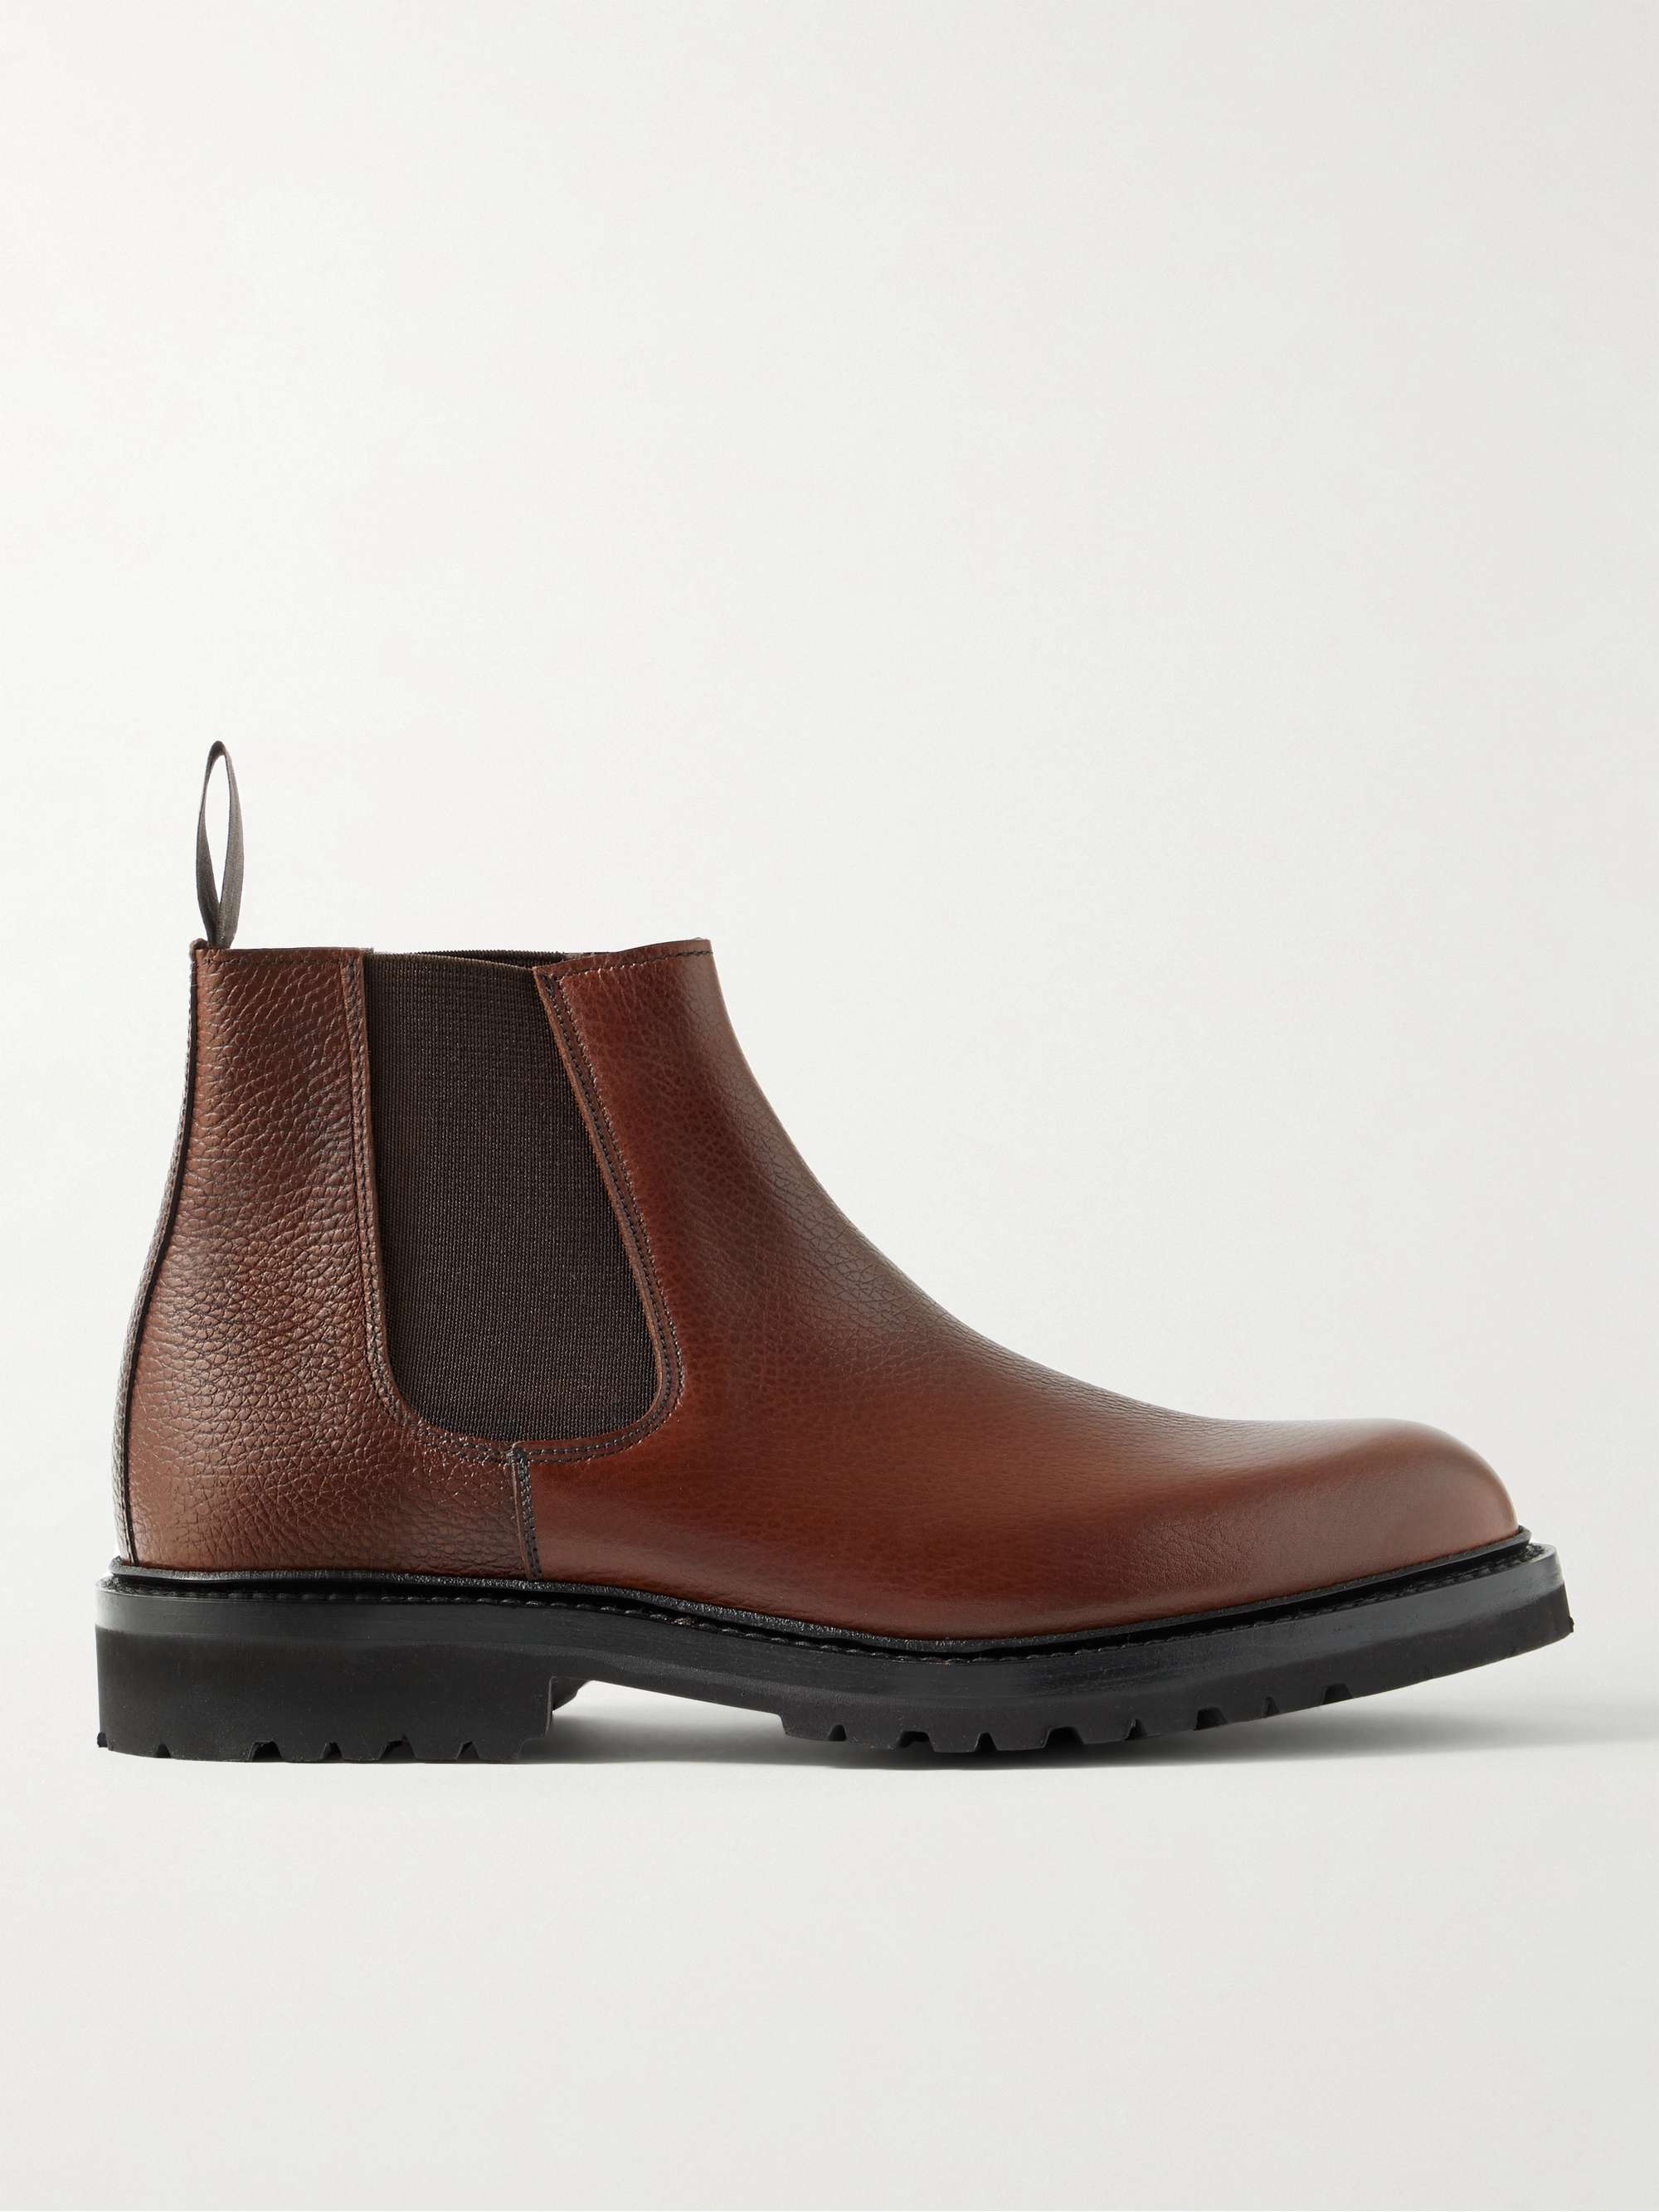 GEORGE CLEVERLEY Jason Full-Grain Leather Chelsea Boots